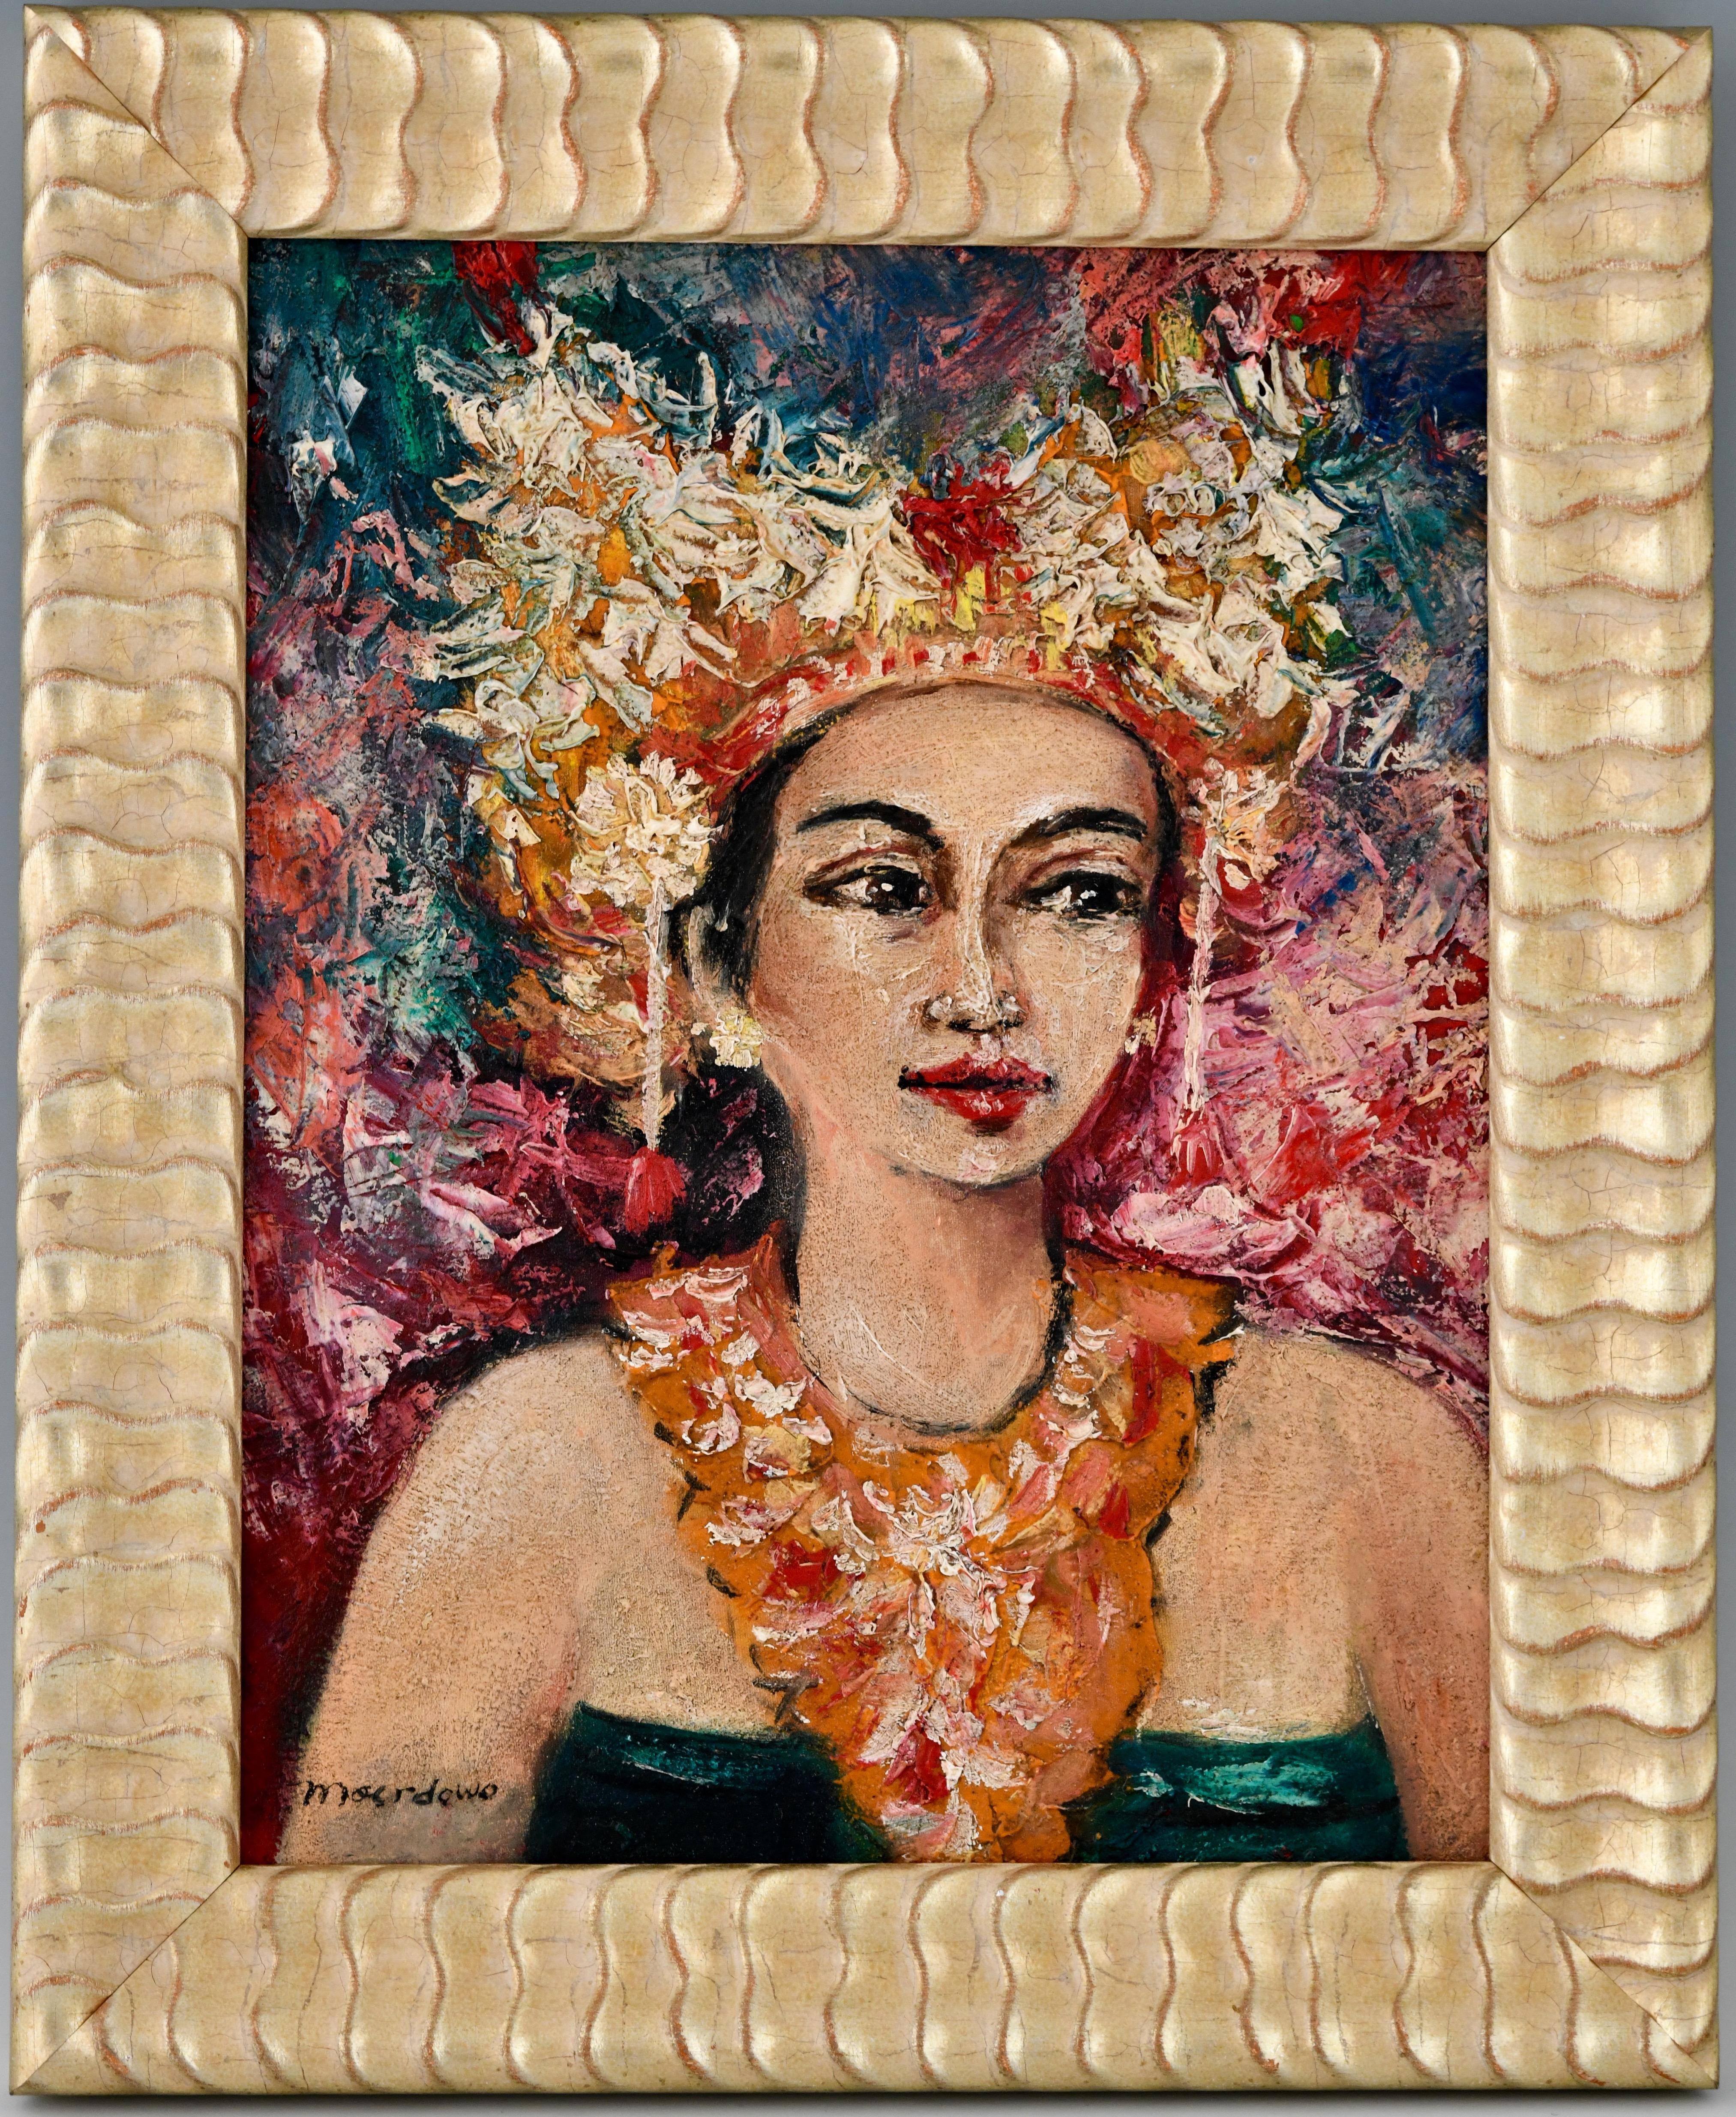 Painting, portrait of a Balinese beauty by Dr. R. M Moerdowo (1919- 1986) Ca; 1960/1970. Oil on canvas, gilt wood frame. 
Works in the collection of the NEKA museum, Bali. ? R.M. Moerdowo, Reflections on Balinese Traditional and Modern Arts,